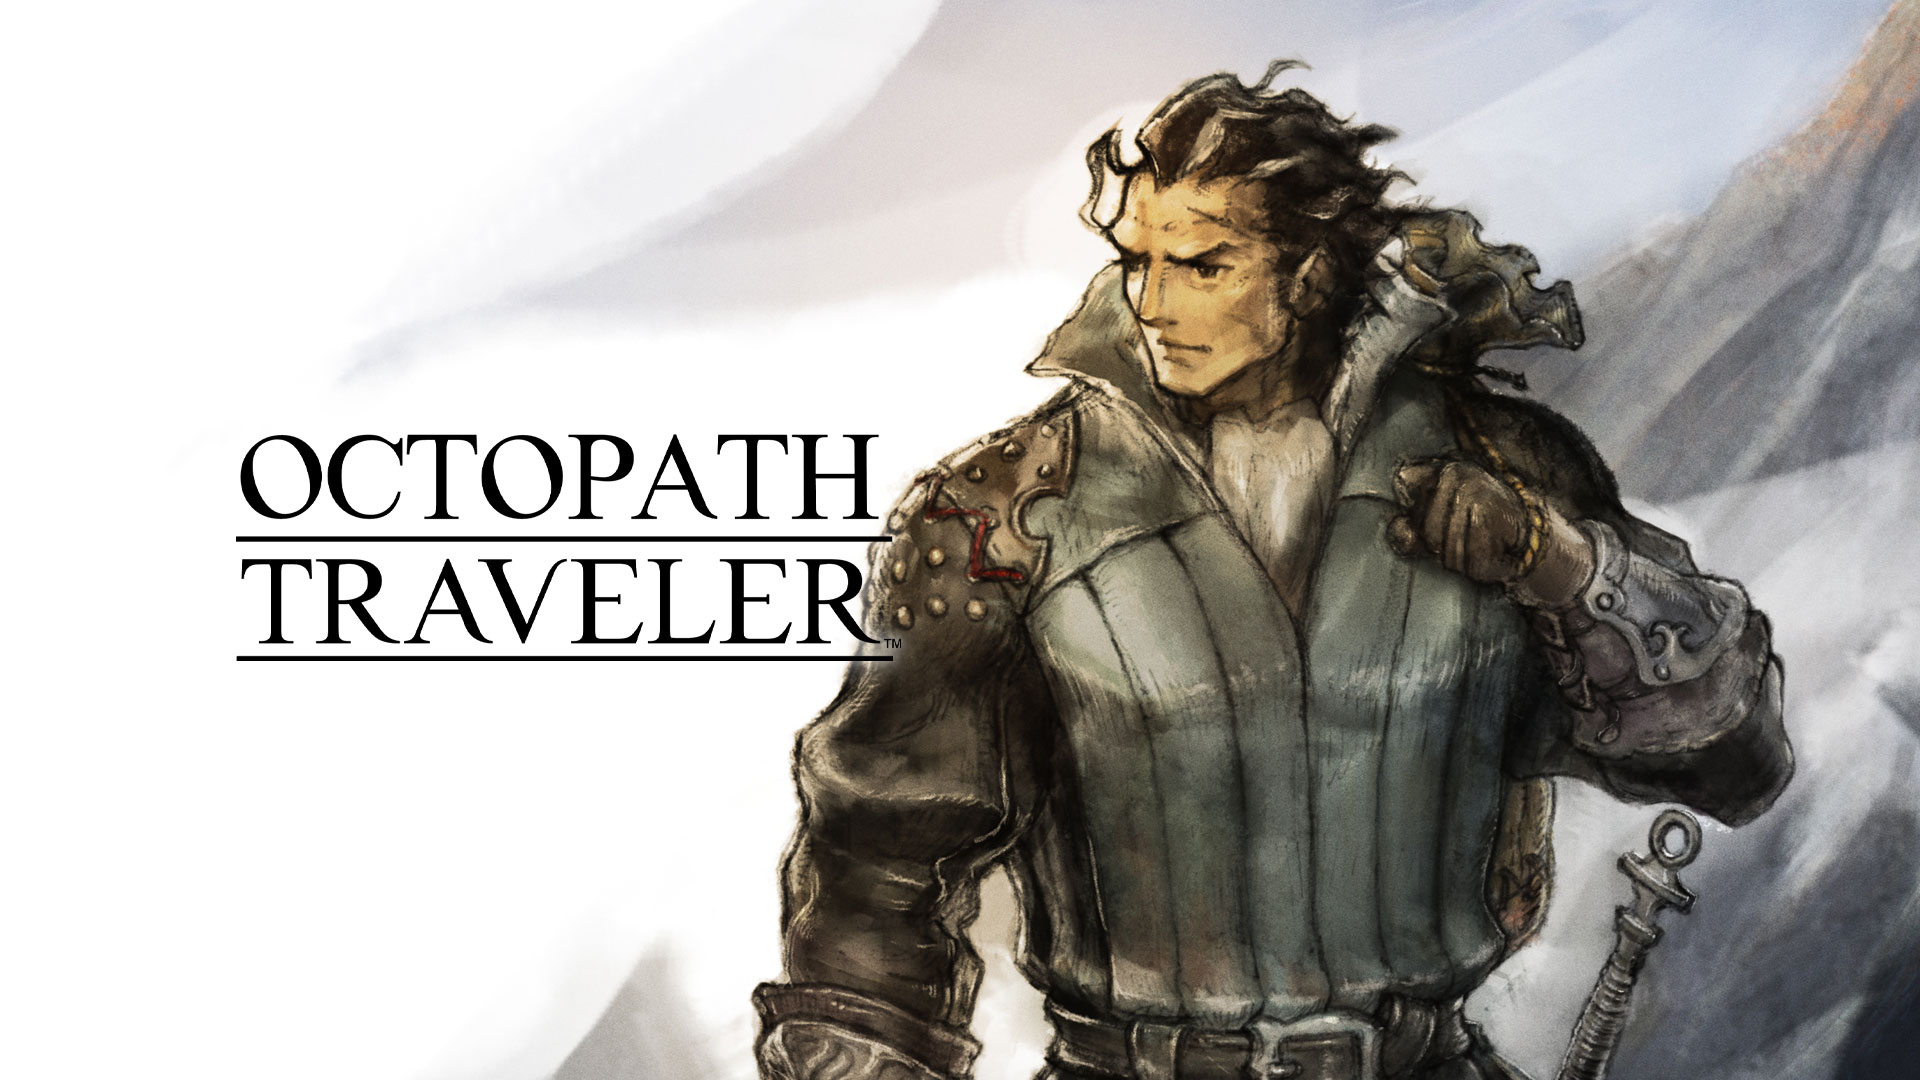 Video Game Octopath Traveler HD Wallpaper | Background Image